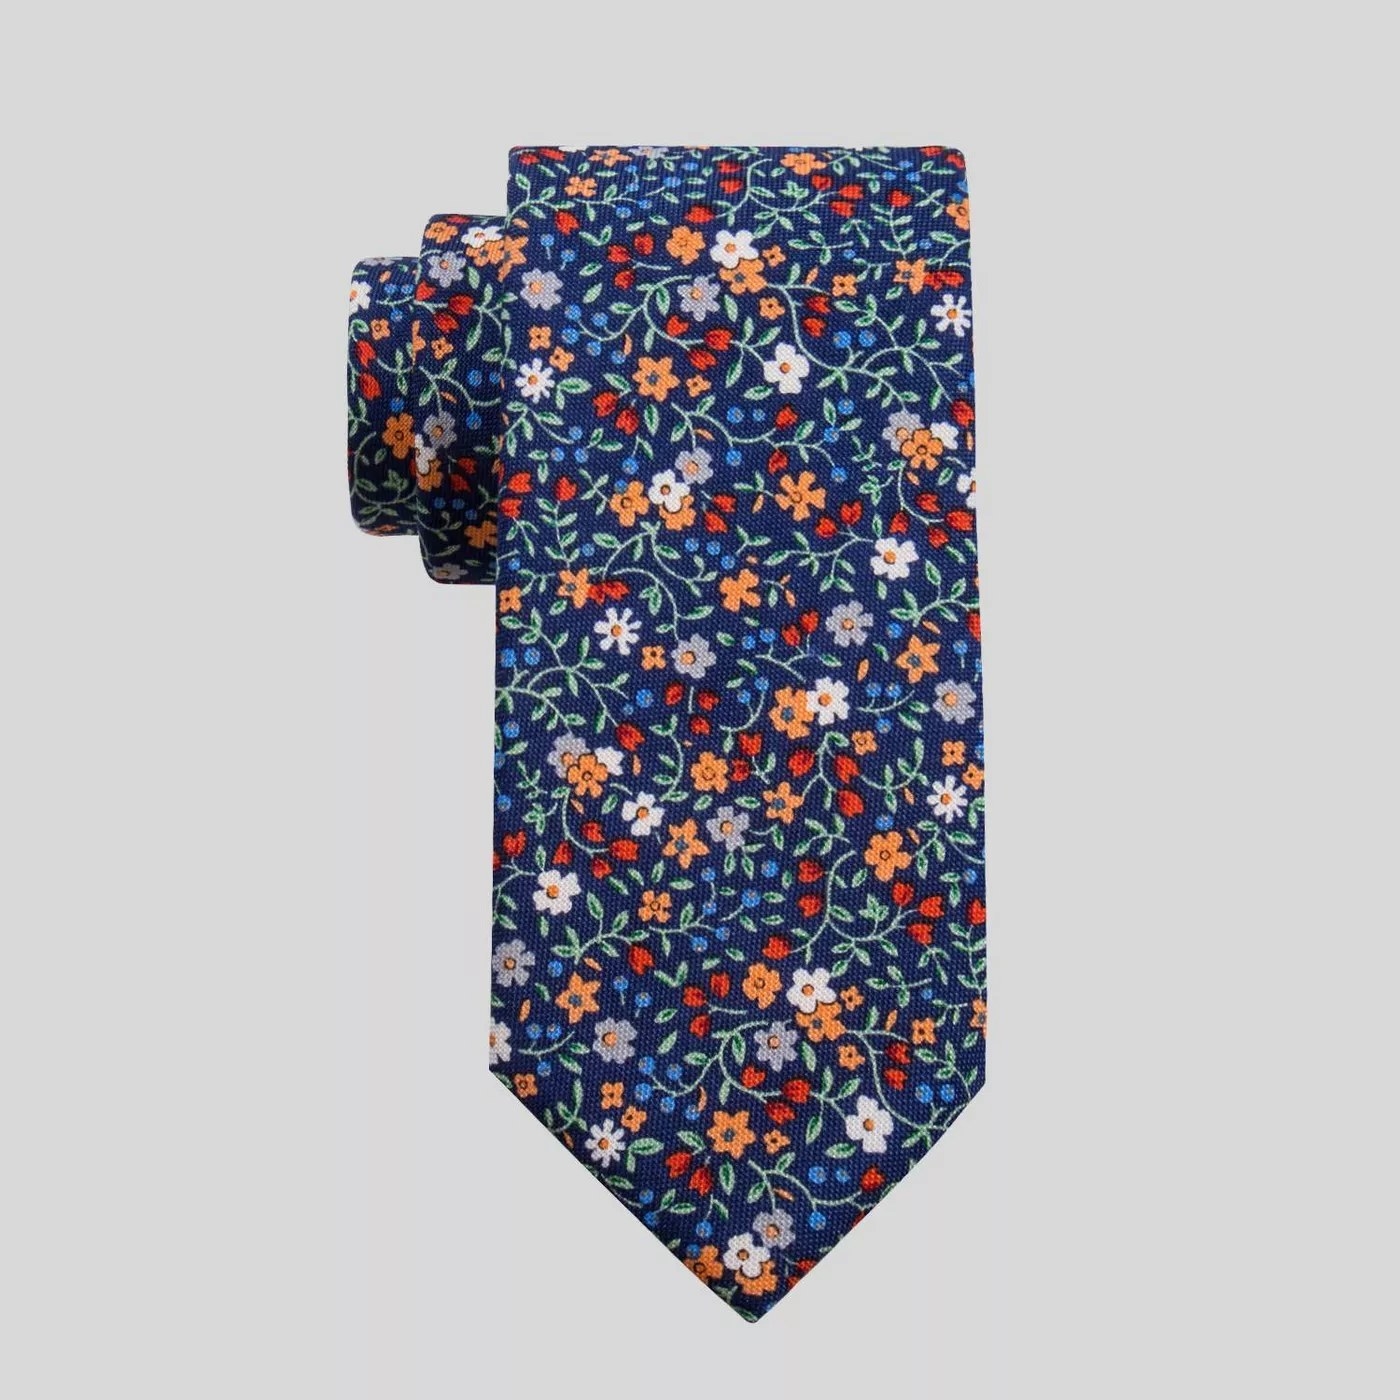 The floral tie